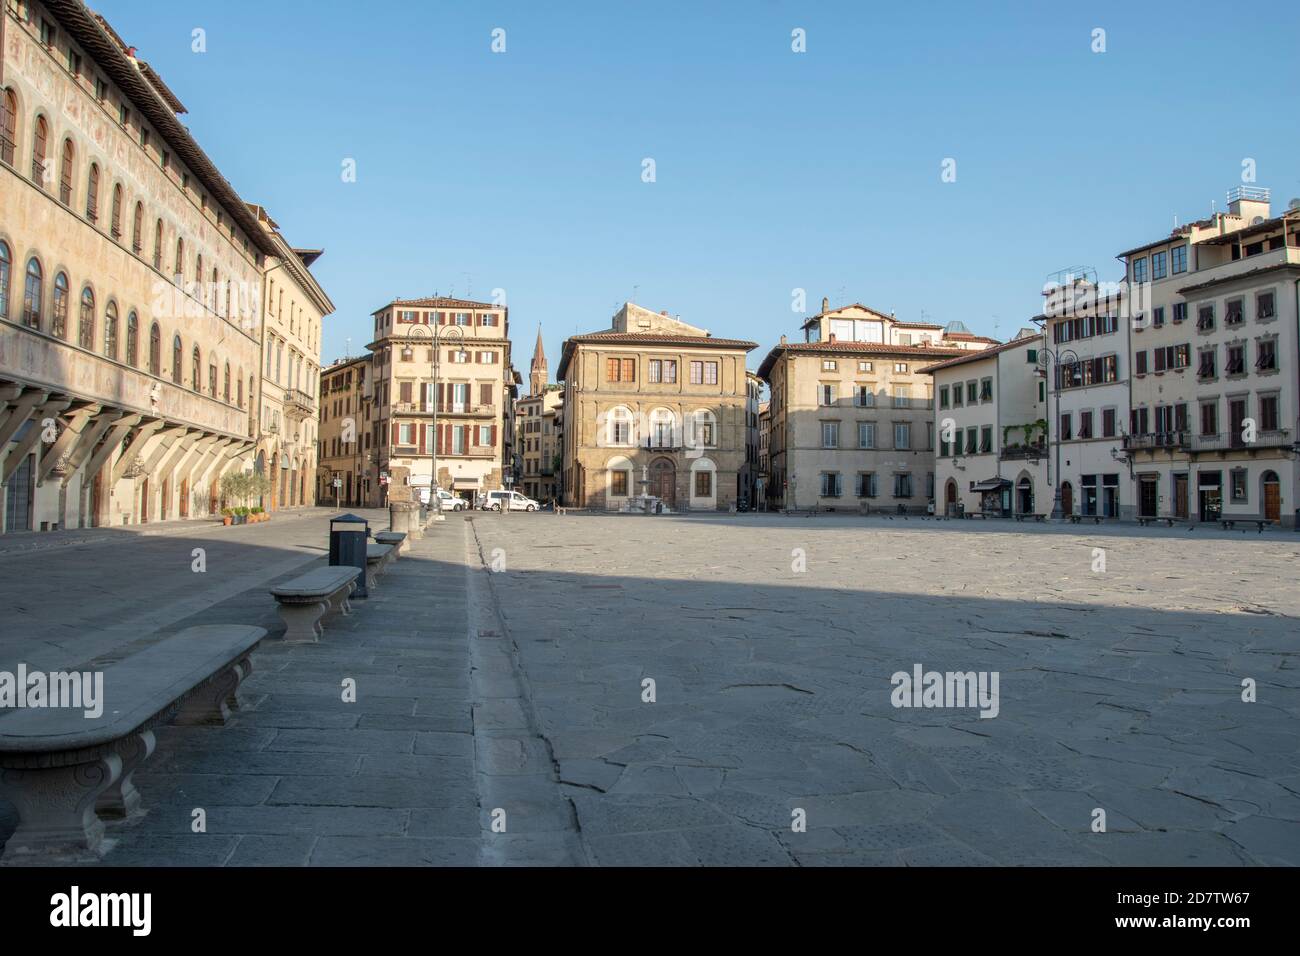 View of Piazza Santa Croce in Florence, Tuscany, Italy. Stock Photo